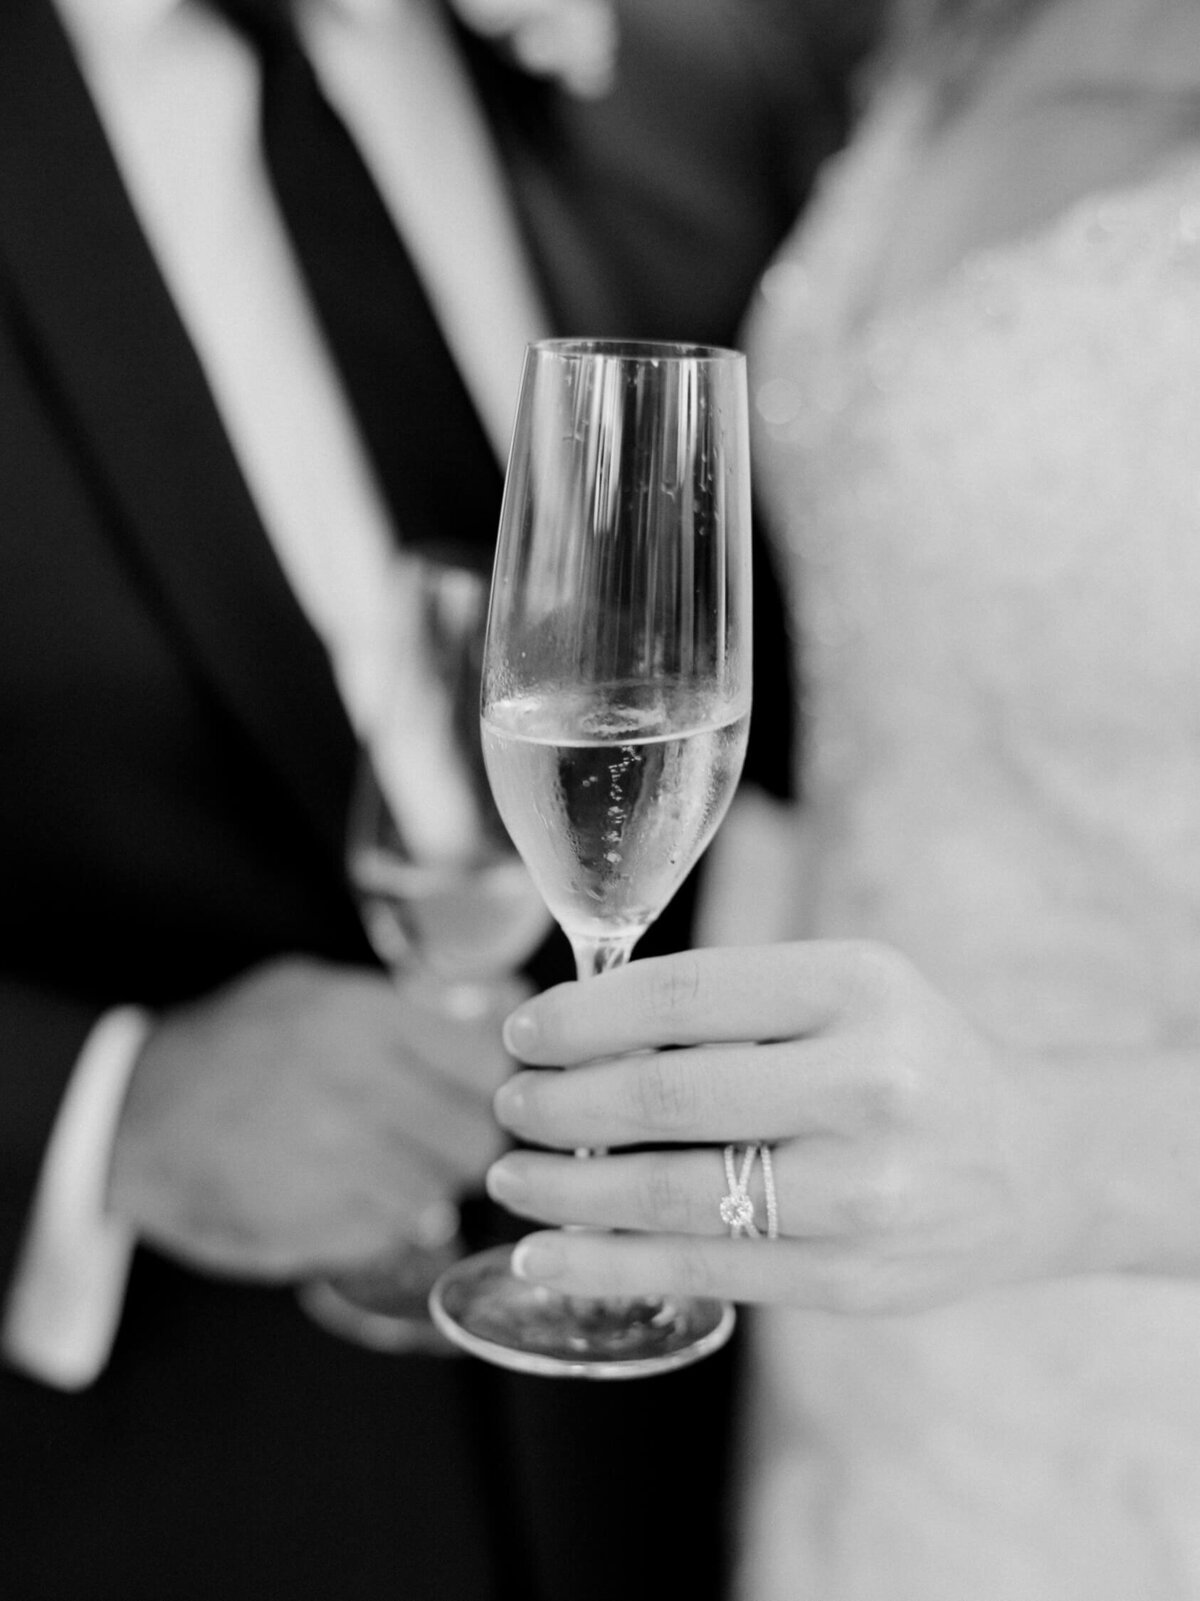 Bride and groom hold champagne glasses and come together after their union.